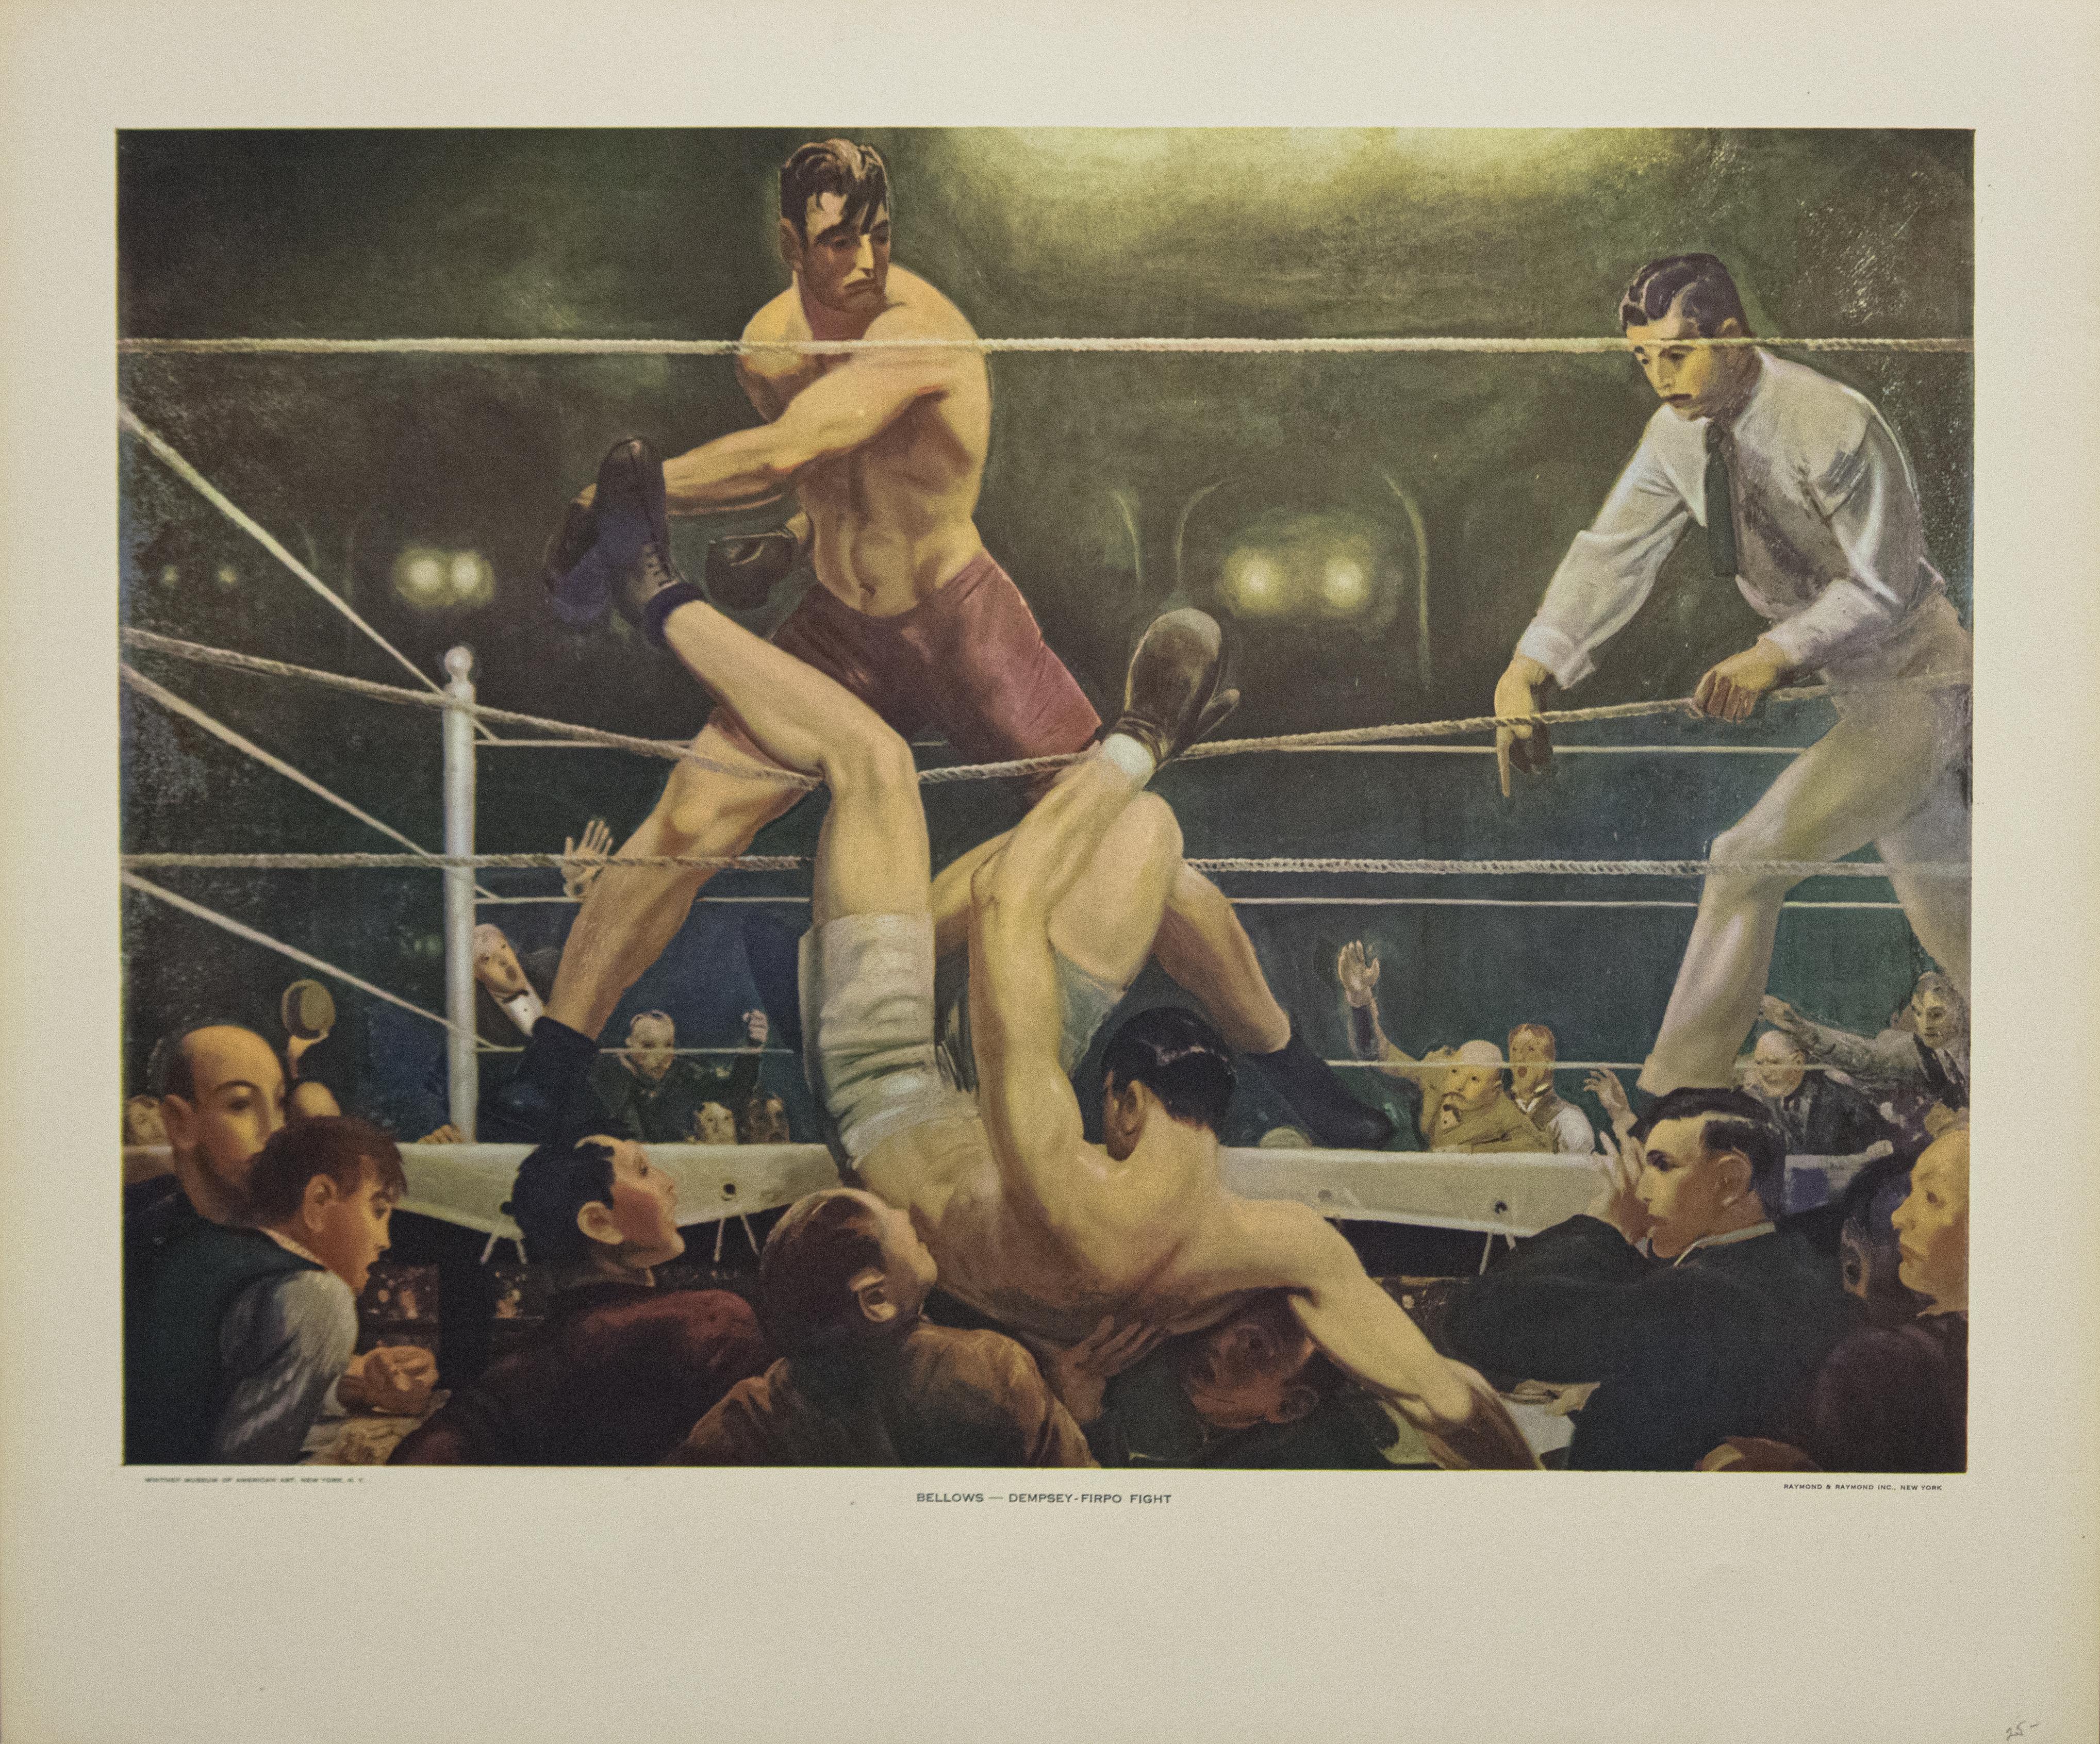 dempsey vs firpo painting